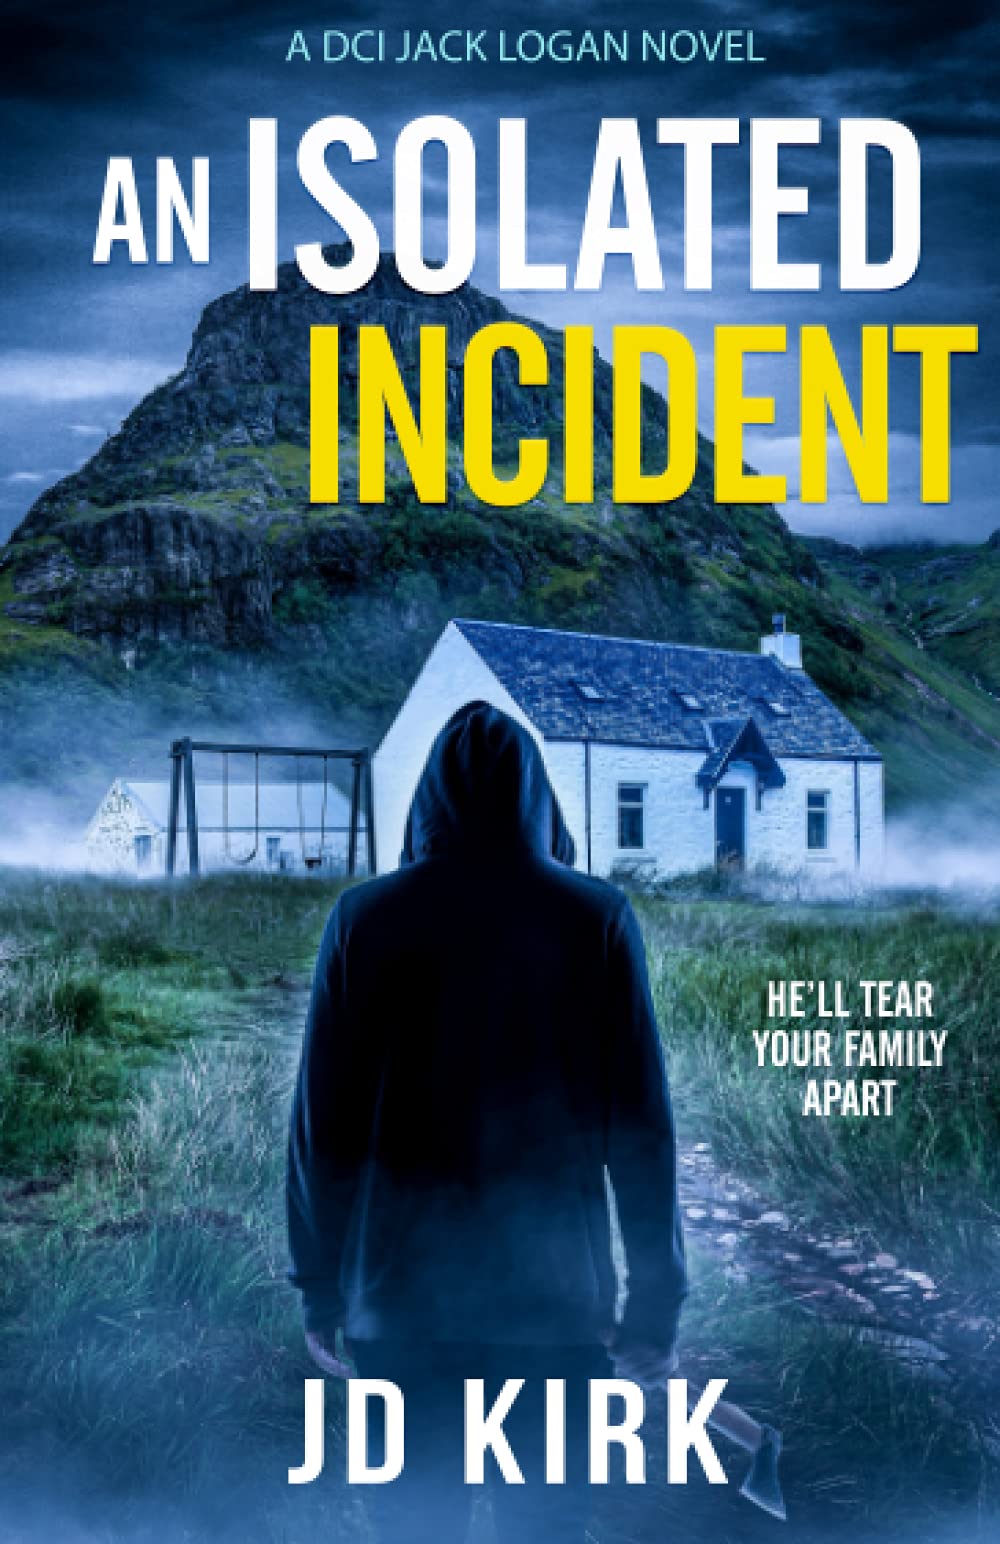 [EPUB] DCI Logan Crime Thrillers #11 An Isolated Incident by J.D. Kirk